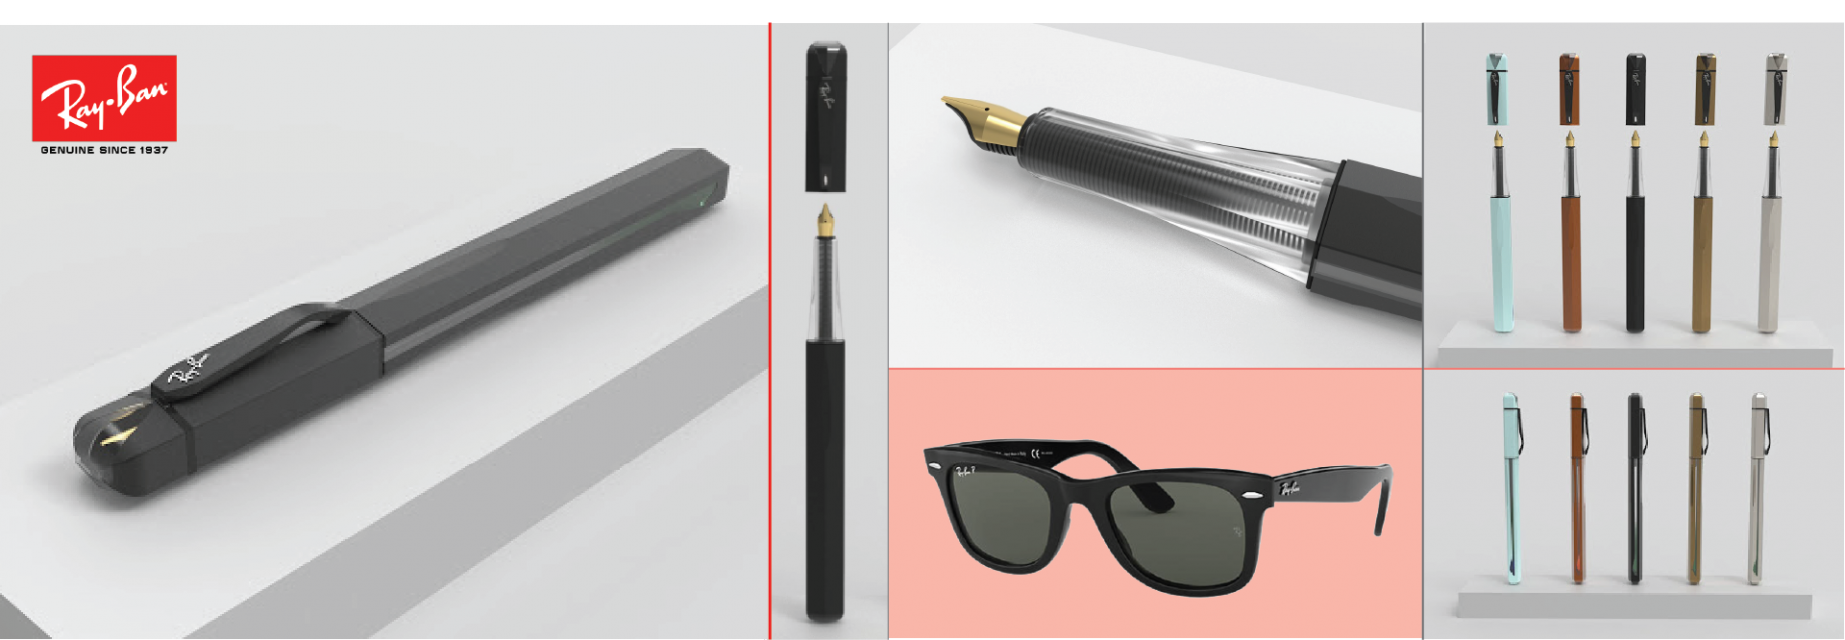 Several renders of a rectangular pen, at different angles and with different colors. 